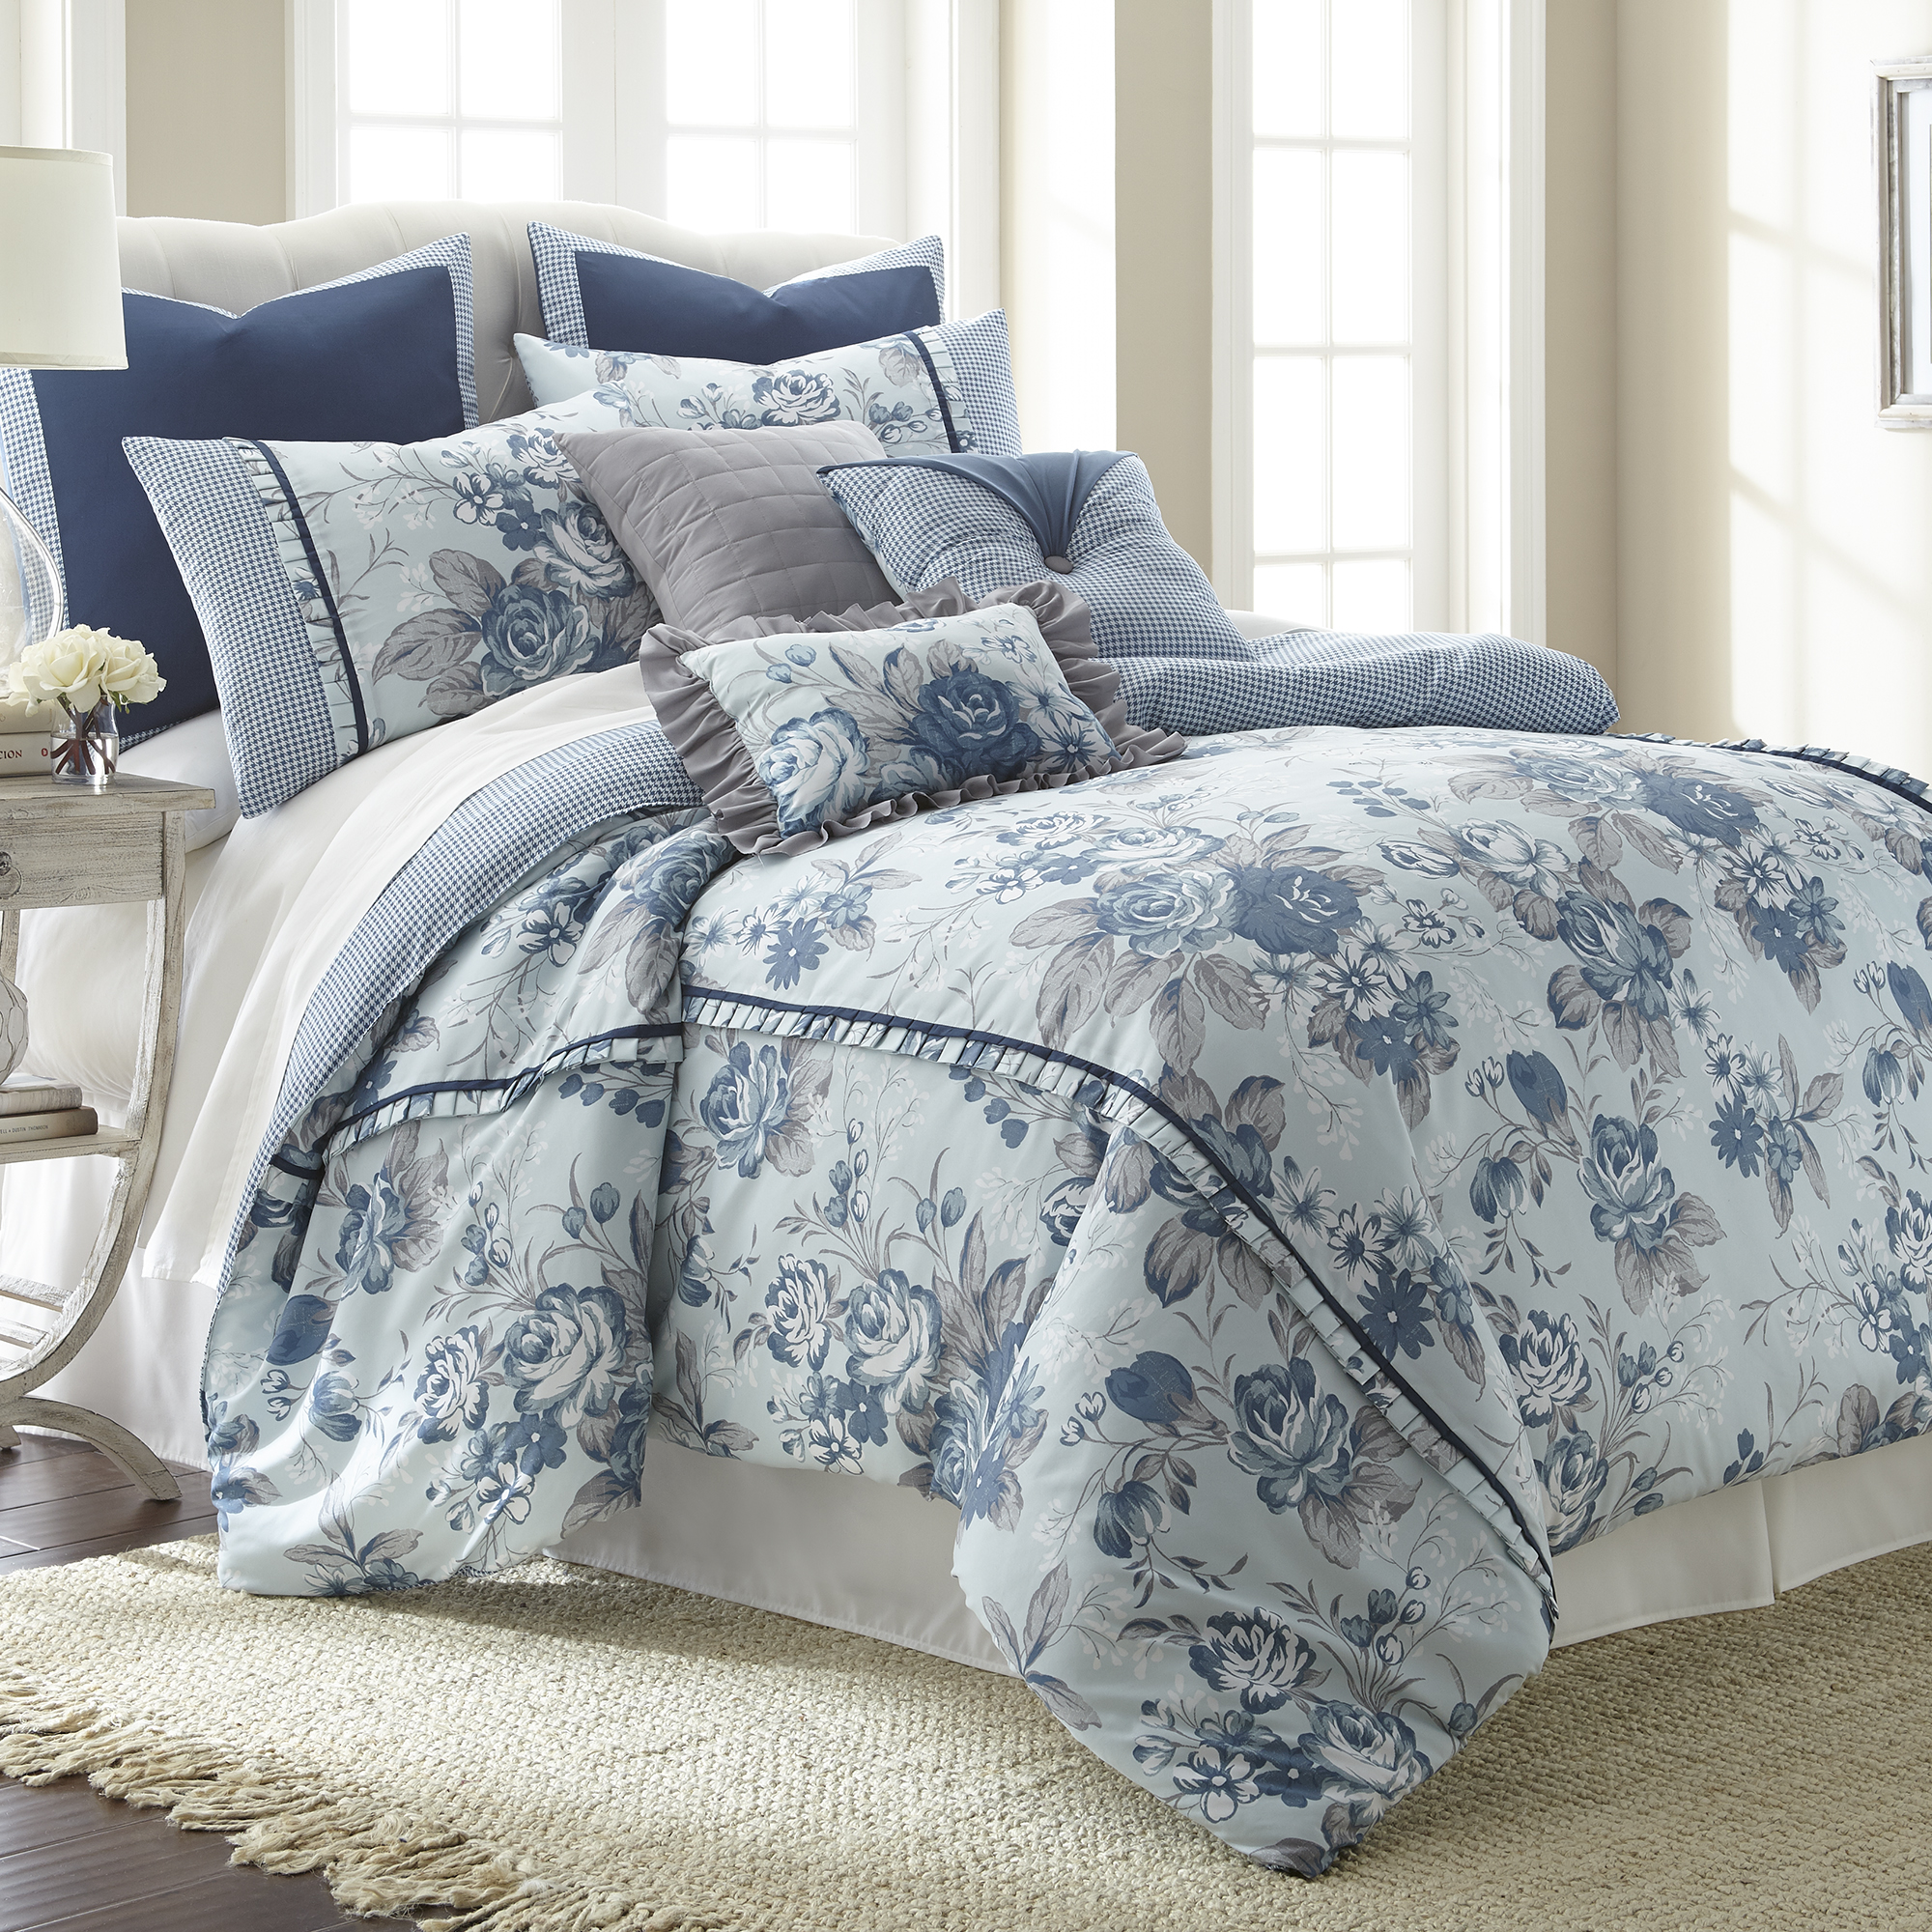 Modern Threads Floral Farmhouse 8-Piece Adult Comforter Set, King - image 1 of 4